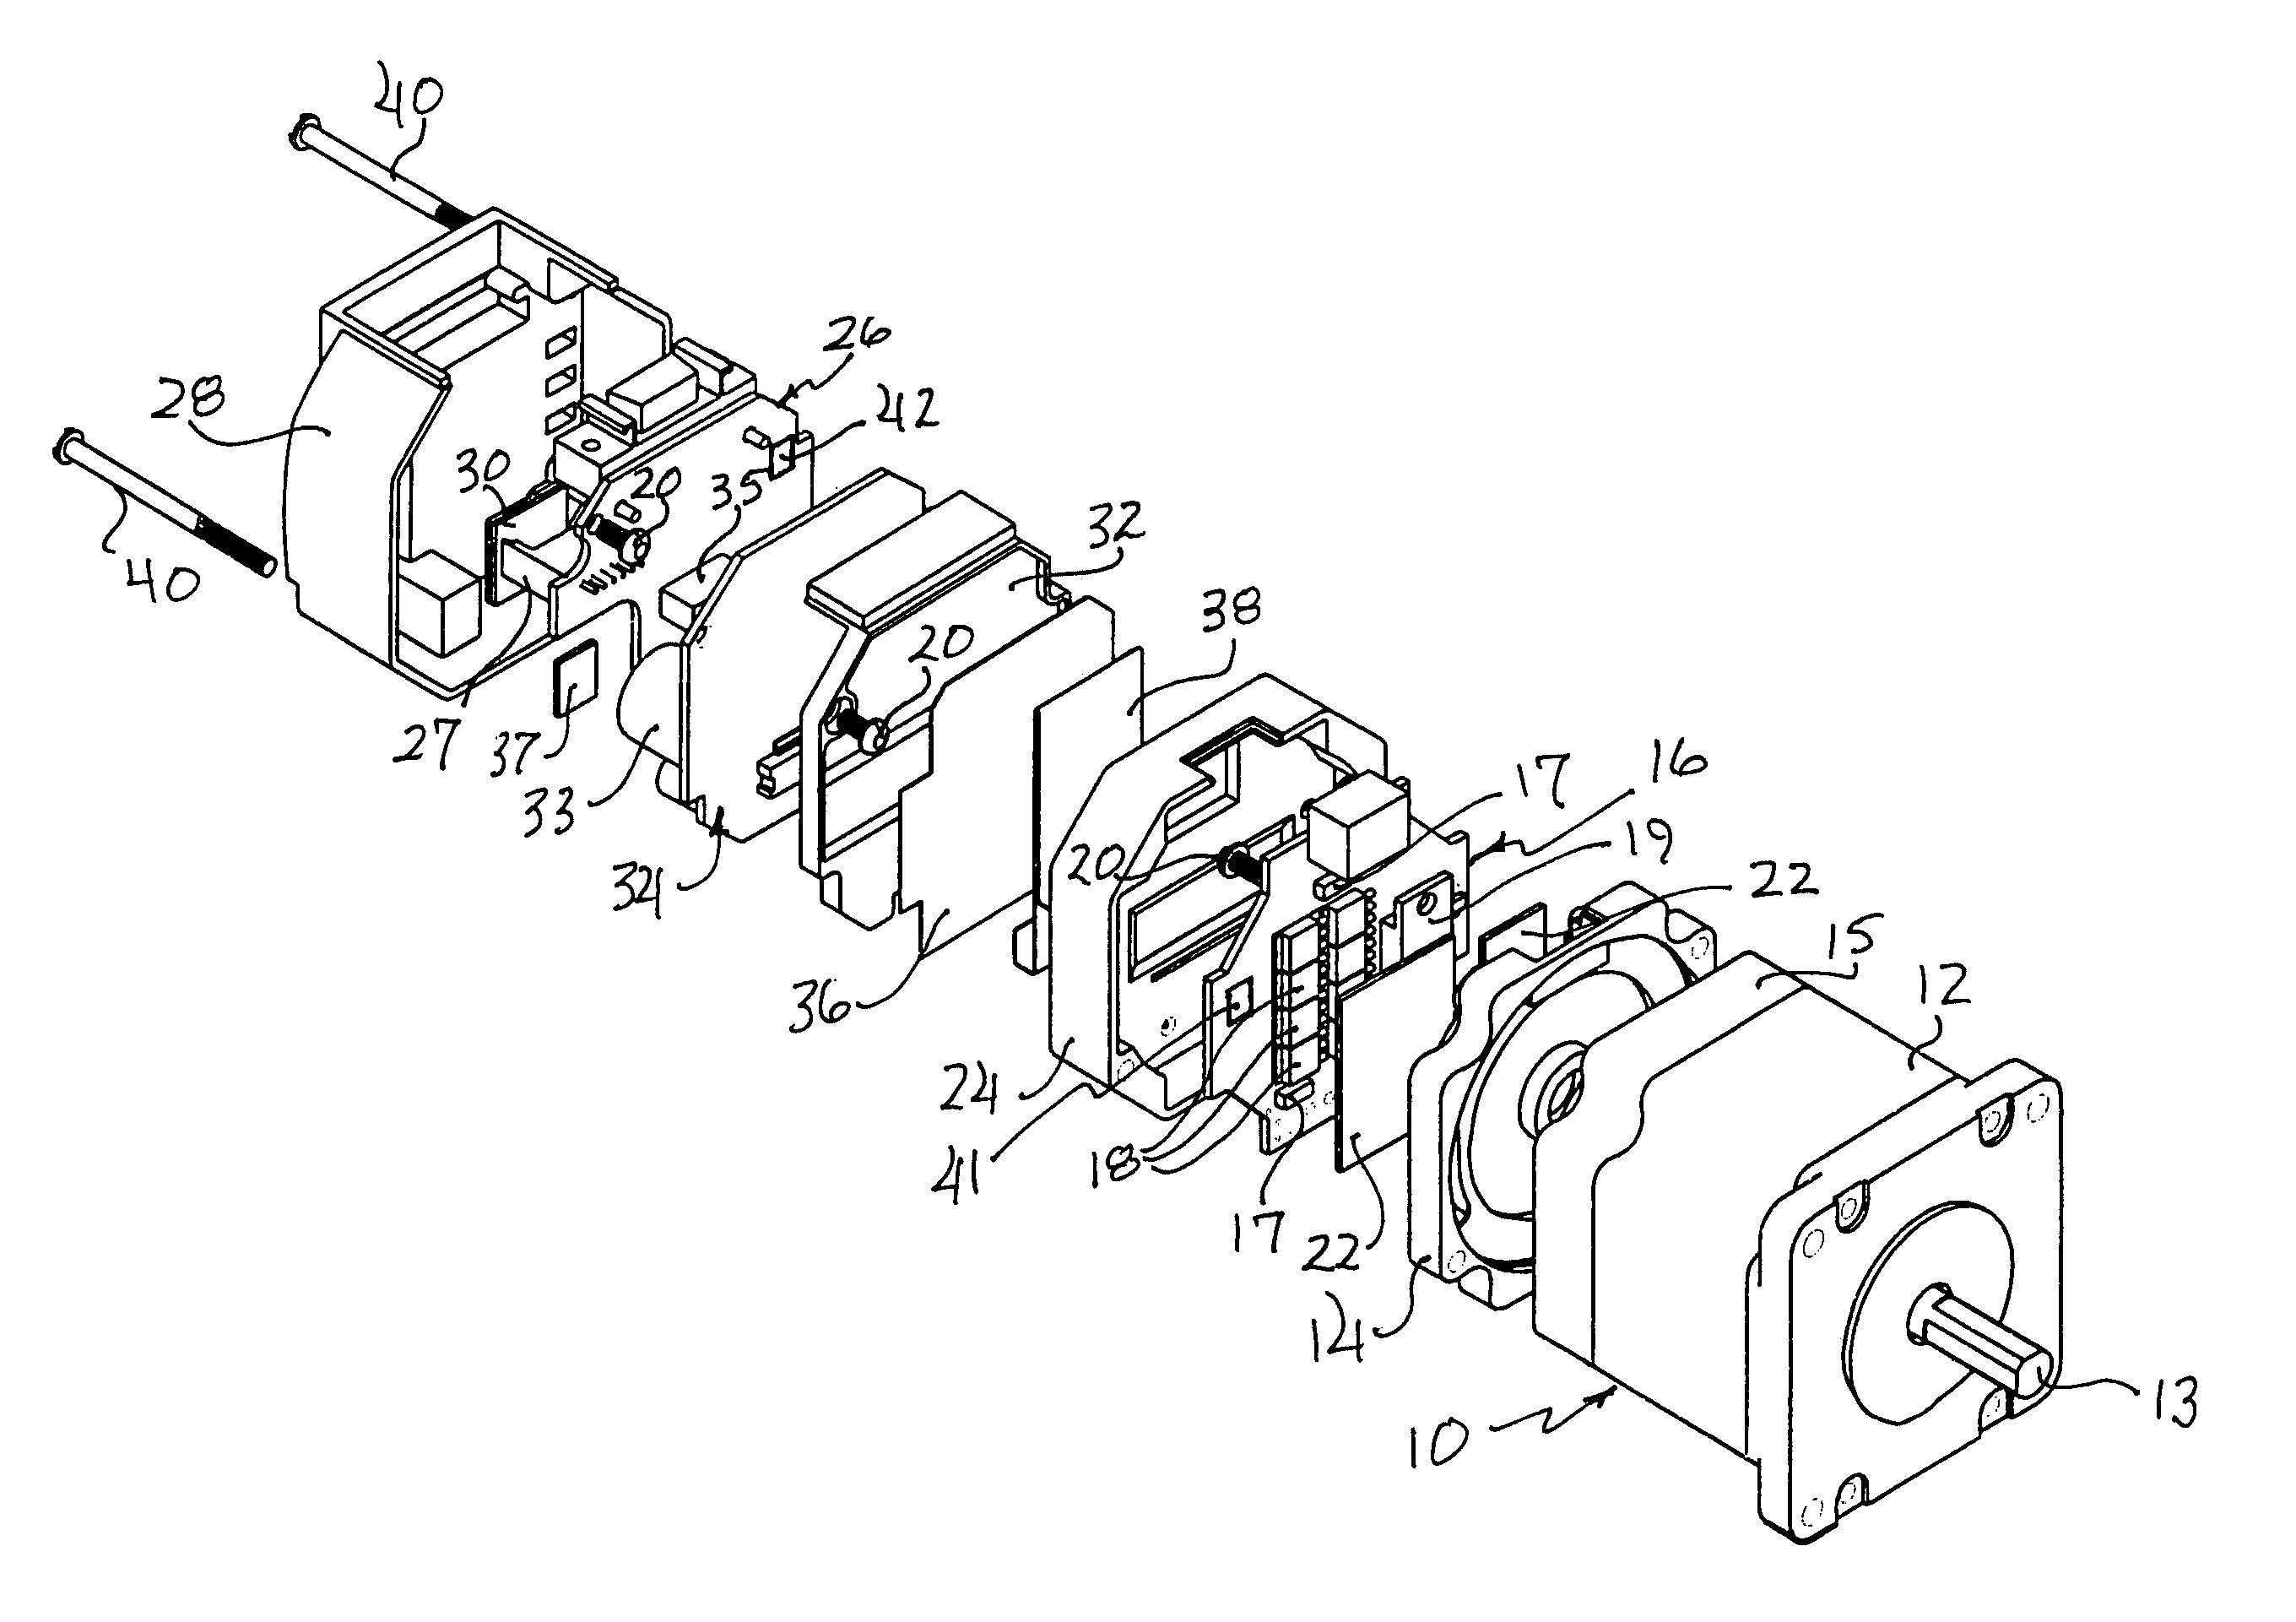 Integrated electric motor and drive, optimized for high-temperature operation